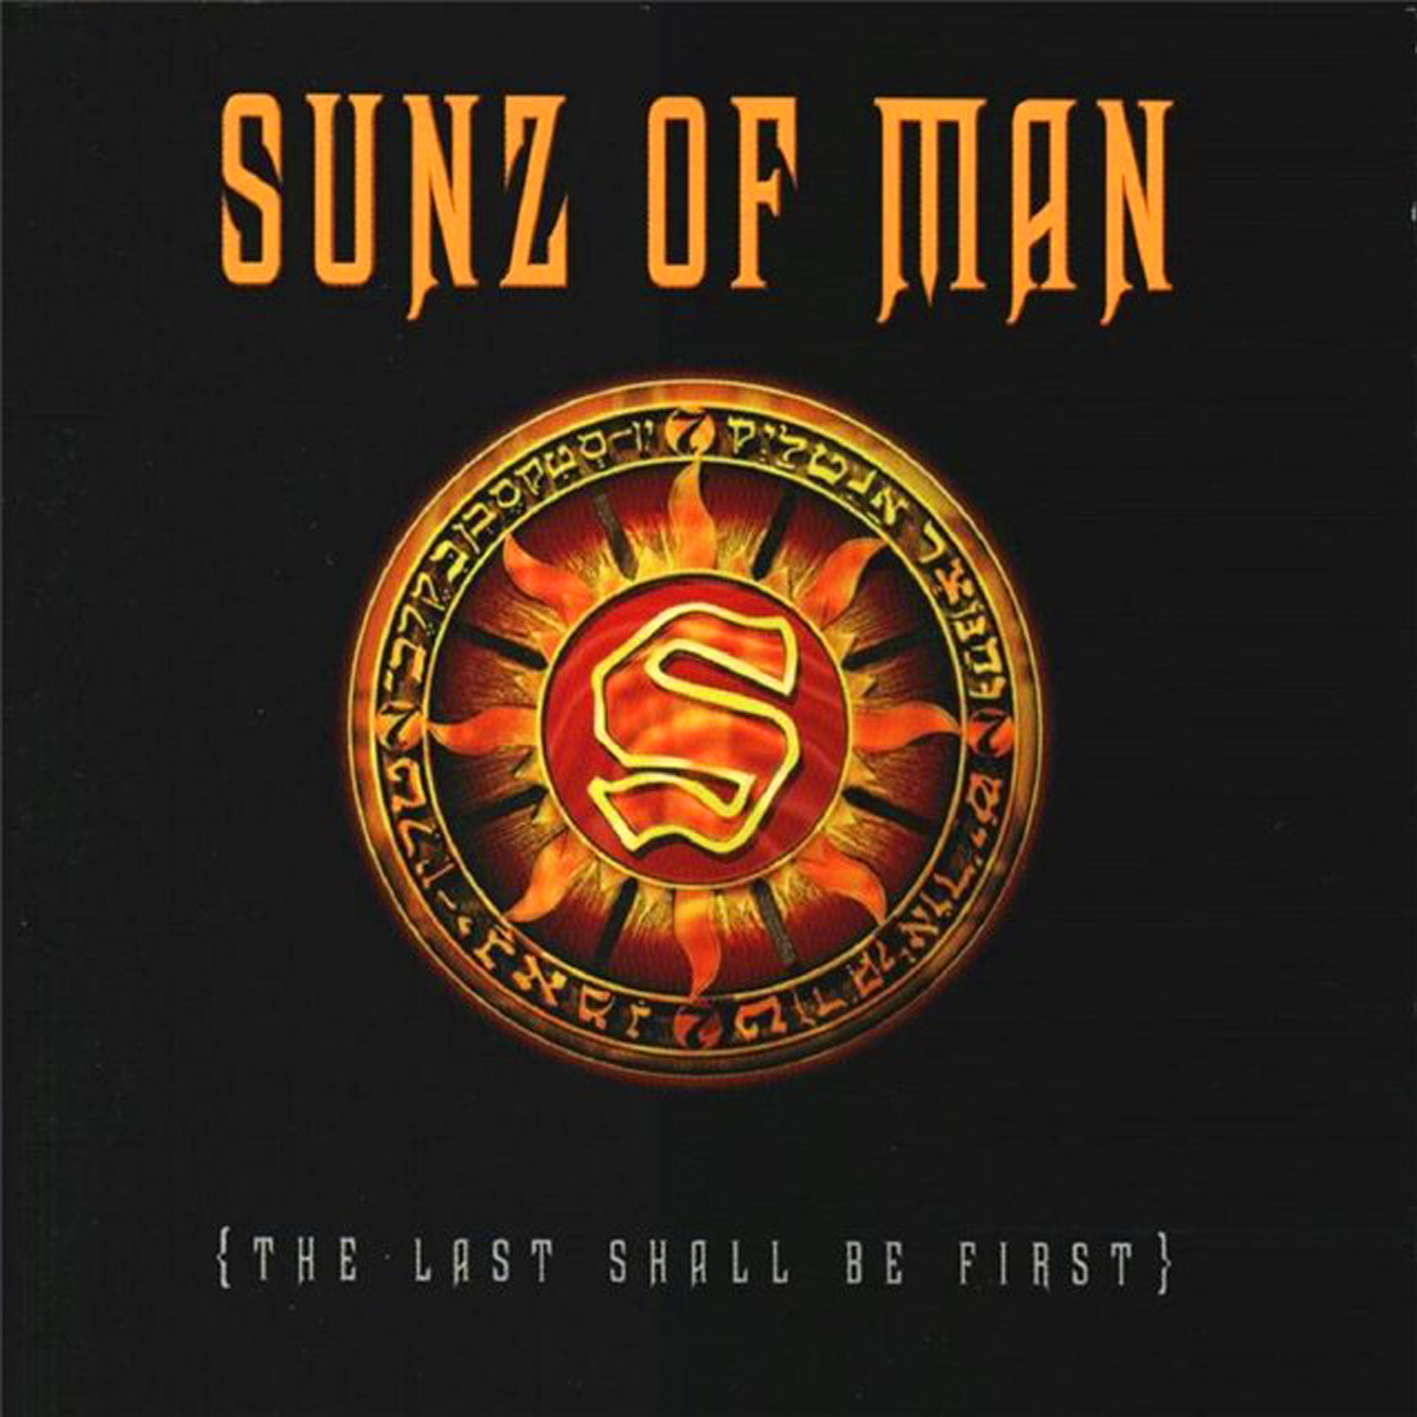 [SUNZ+OF+MAN+-+THE+LAST+SHALL+BE+FIRST.jpg]